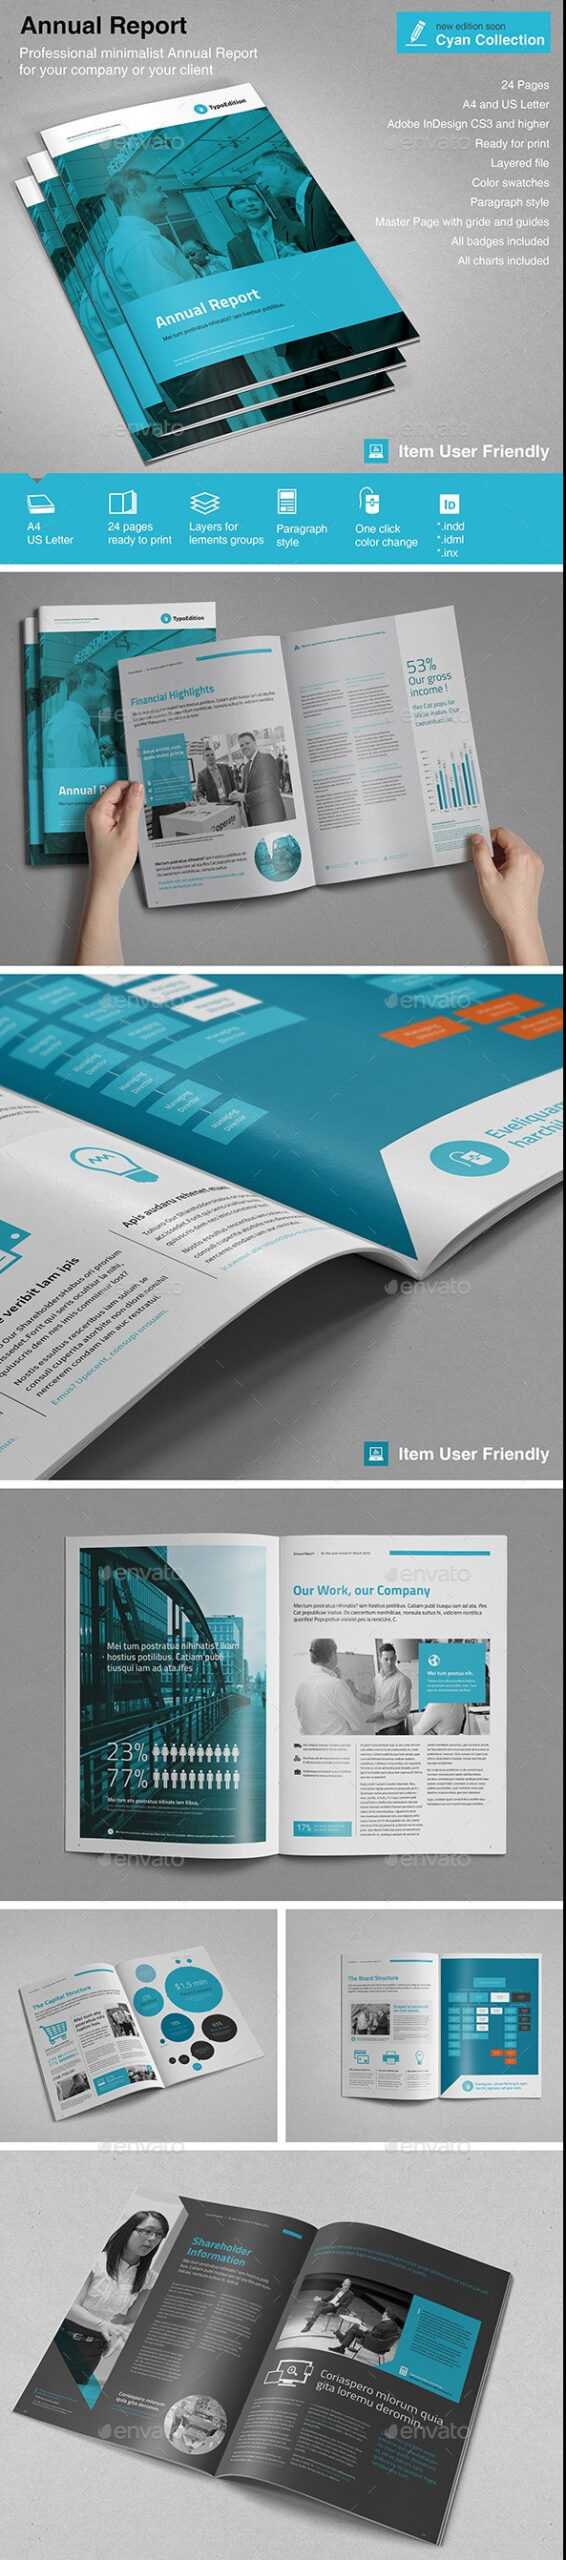 32+ Indesign Annual Report Templates For Corporate Inside Free Annual Report Template Indesign